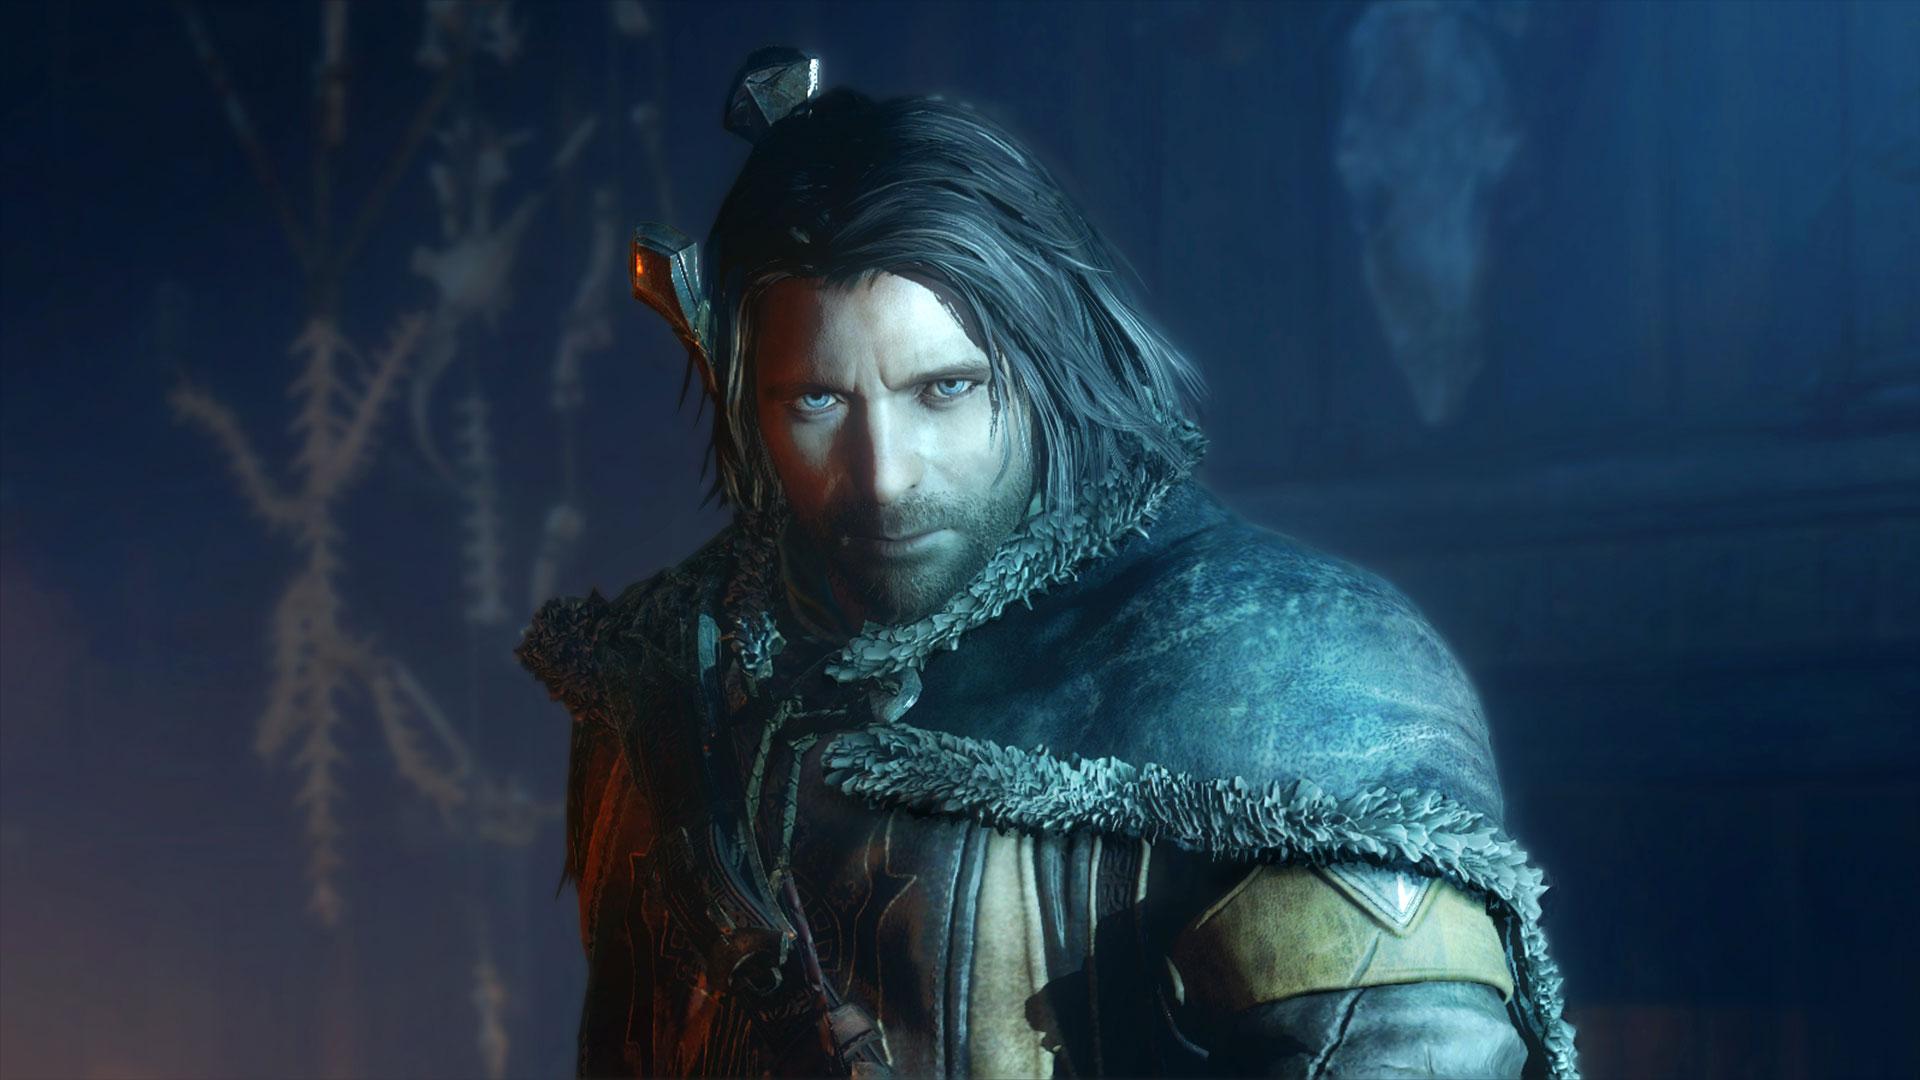 Monolith Discusses Potential For Middle-Earth: Shadow of Mordor 2